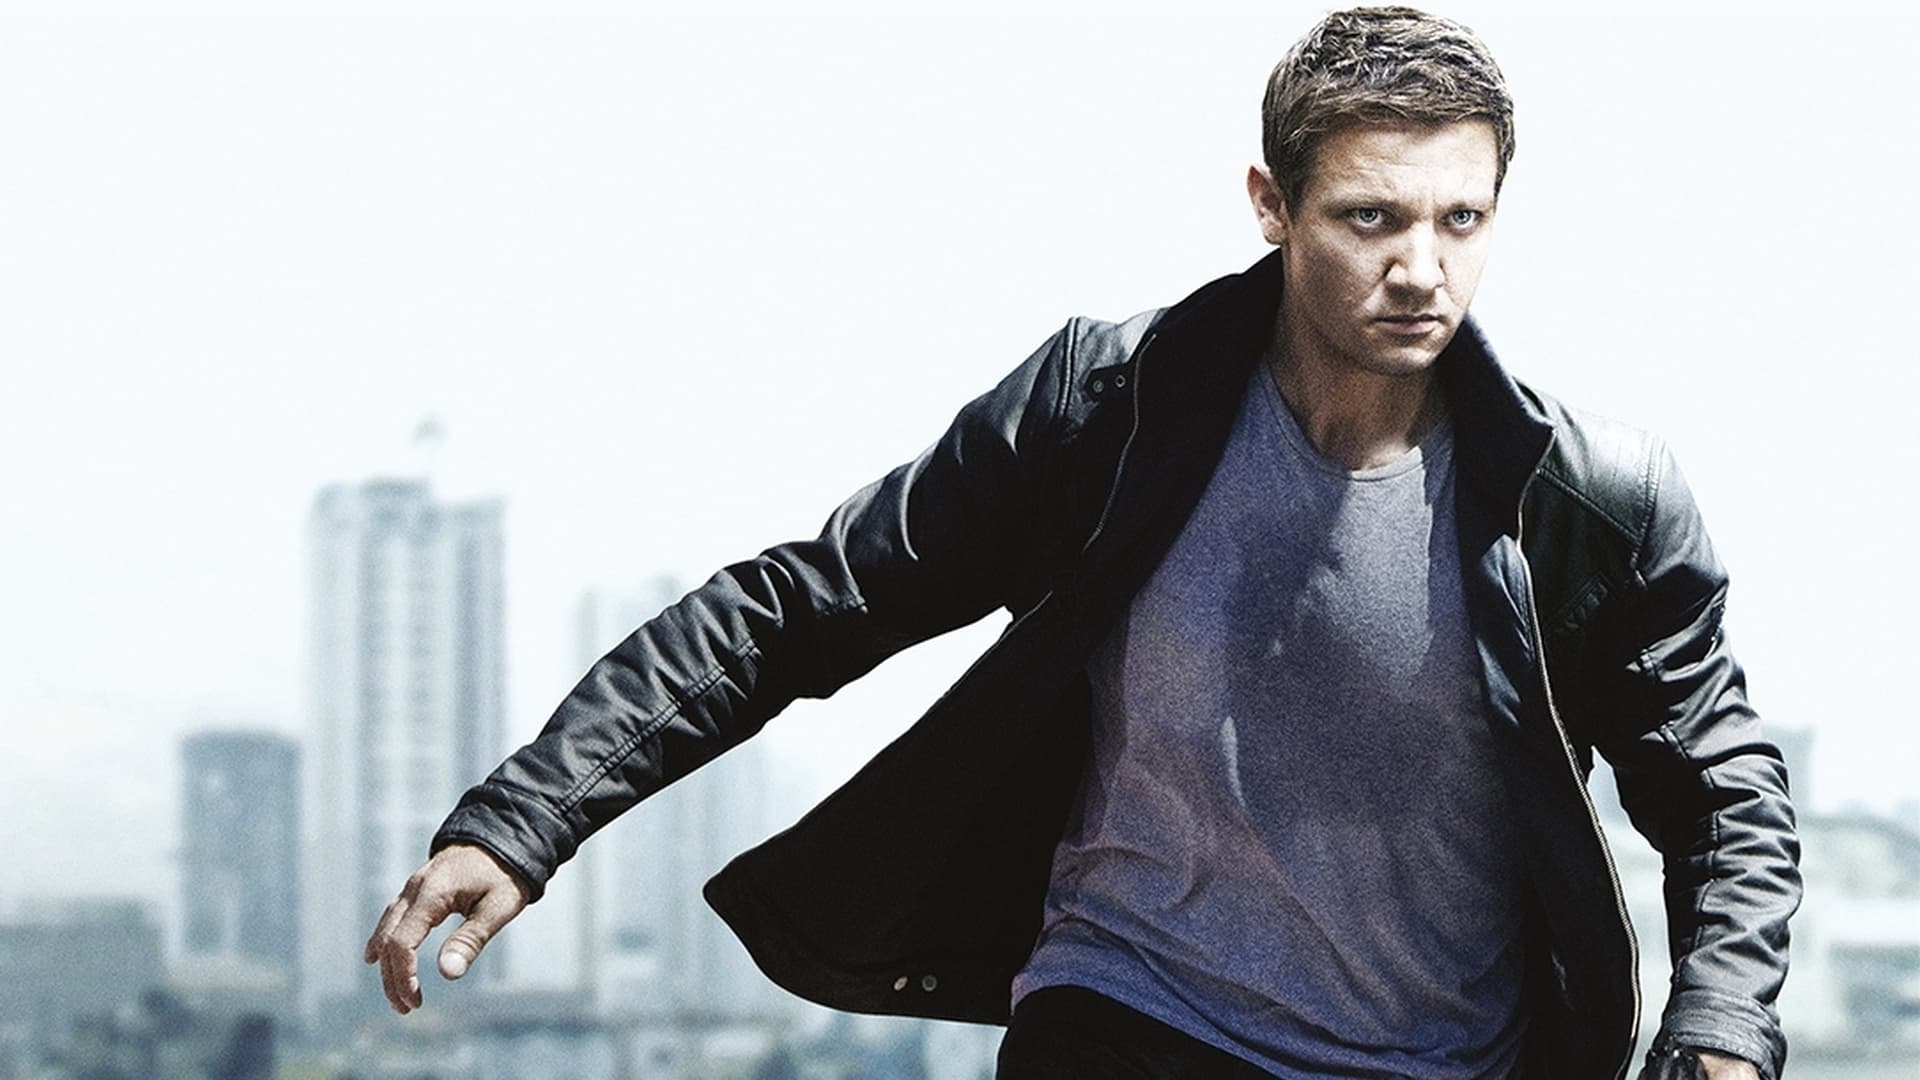 The Bourne: A 2012 American action-thriller film directed by Tony Gilroy, The Bourne Legacy. 1920x1080 Full HD Wallpaper.